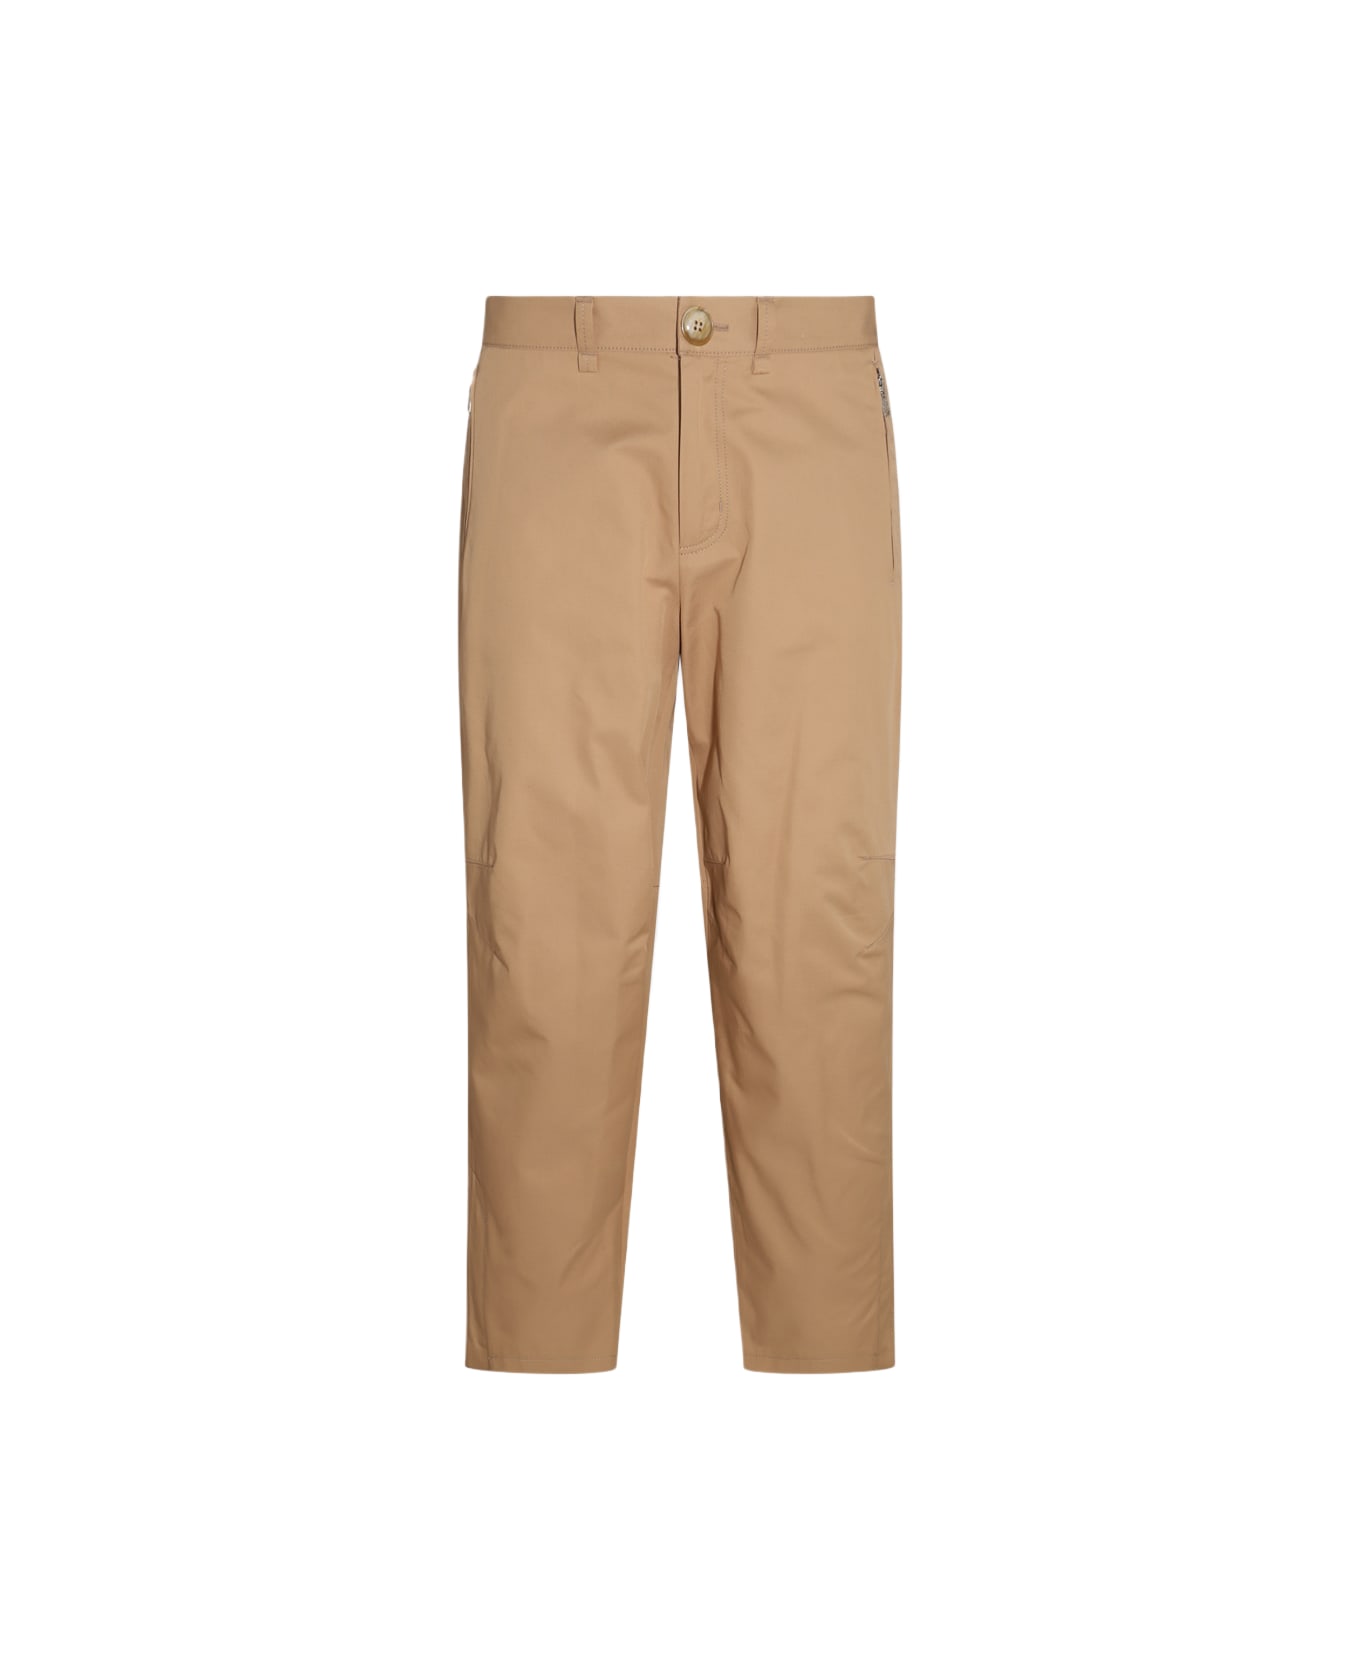 Lanvin Sand Cotton And Wool Blend Pants - SAND ボトムス